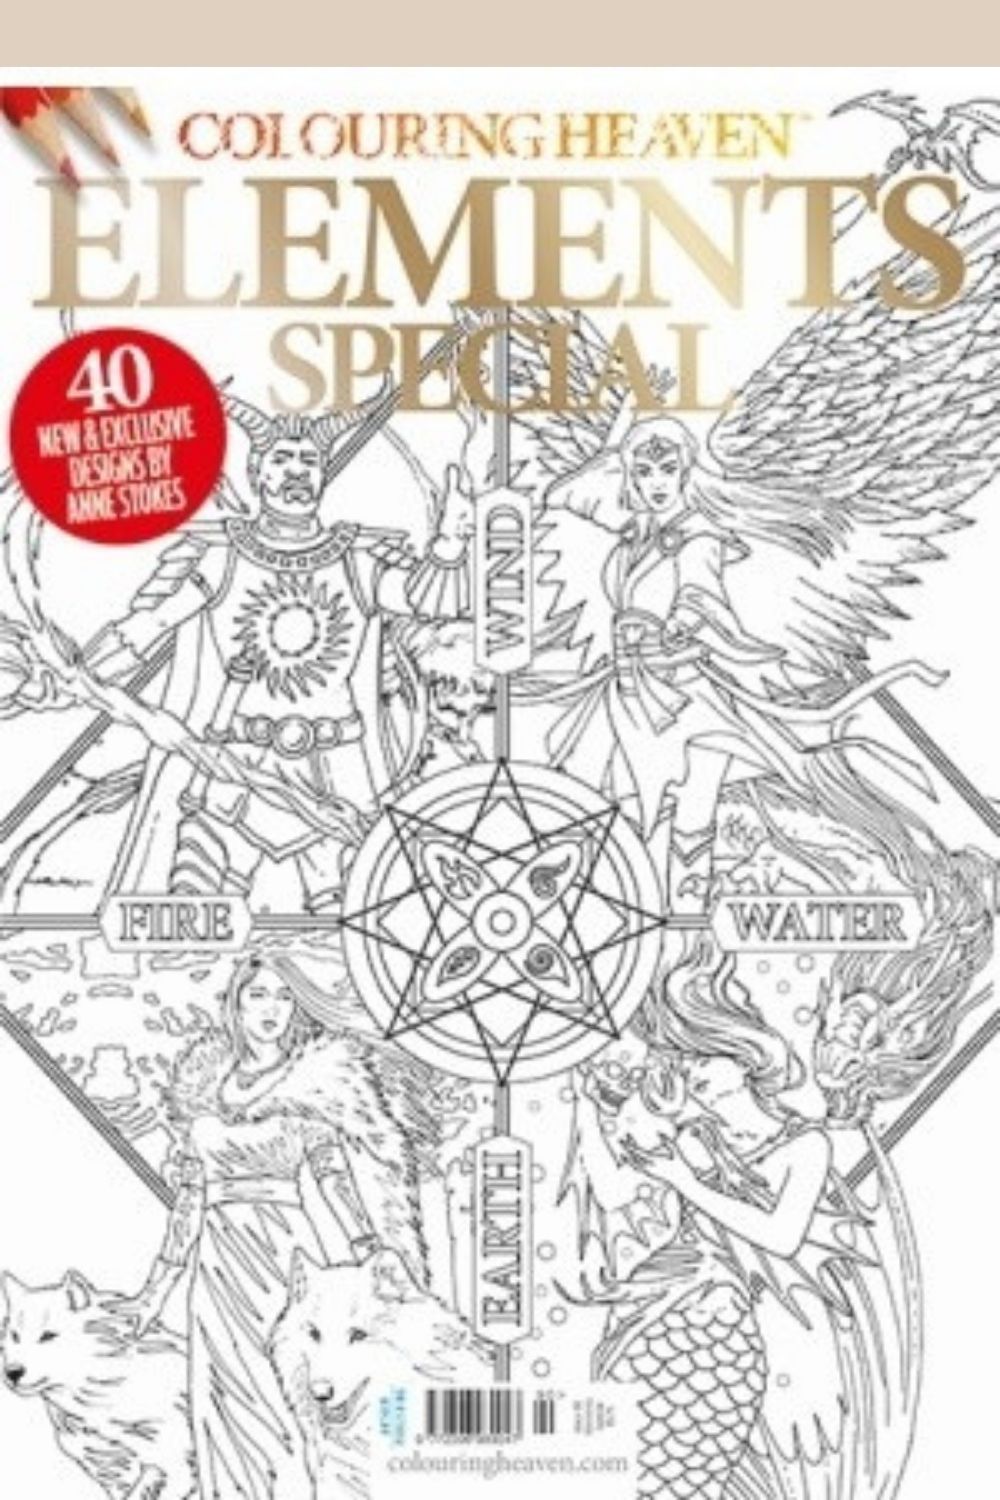 cover of colouring heaven issue 90, elements special